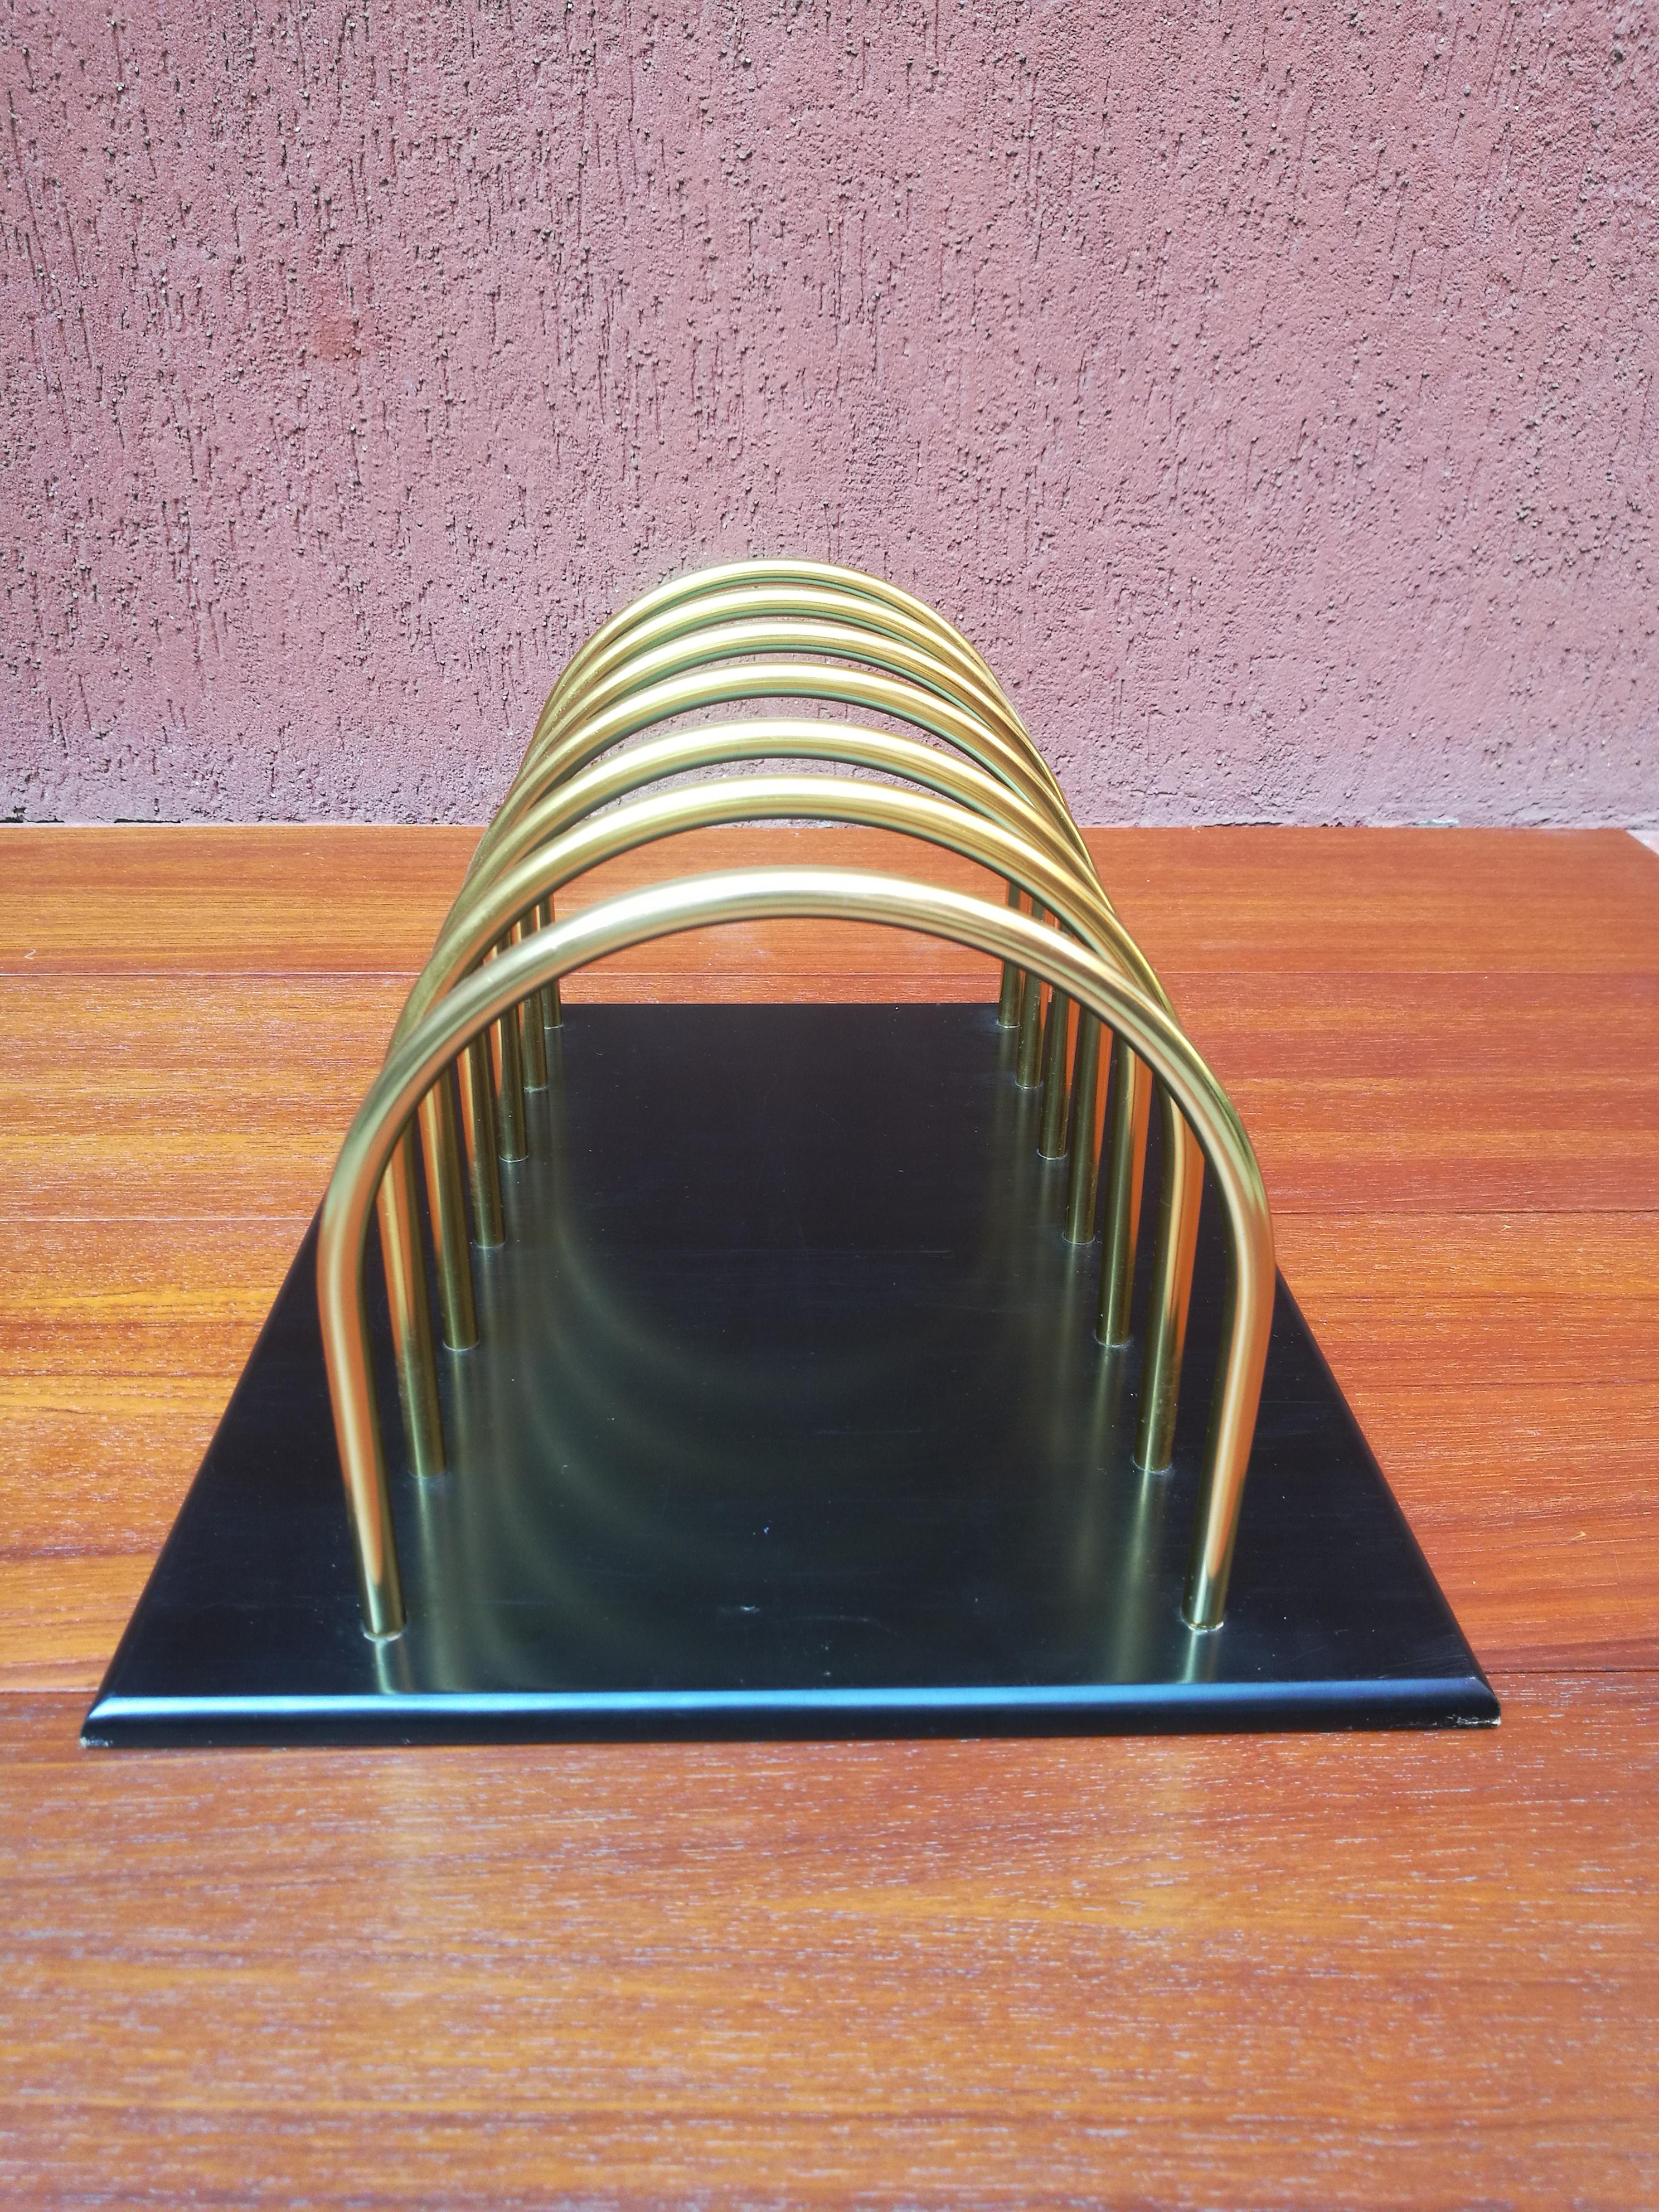 Minimalist Fantastic Disk Holder or Magazine Holder in Brass and lacquered Wood 1970s Italy